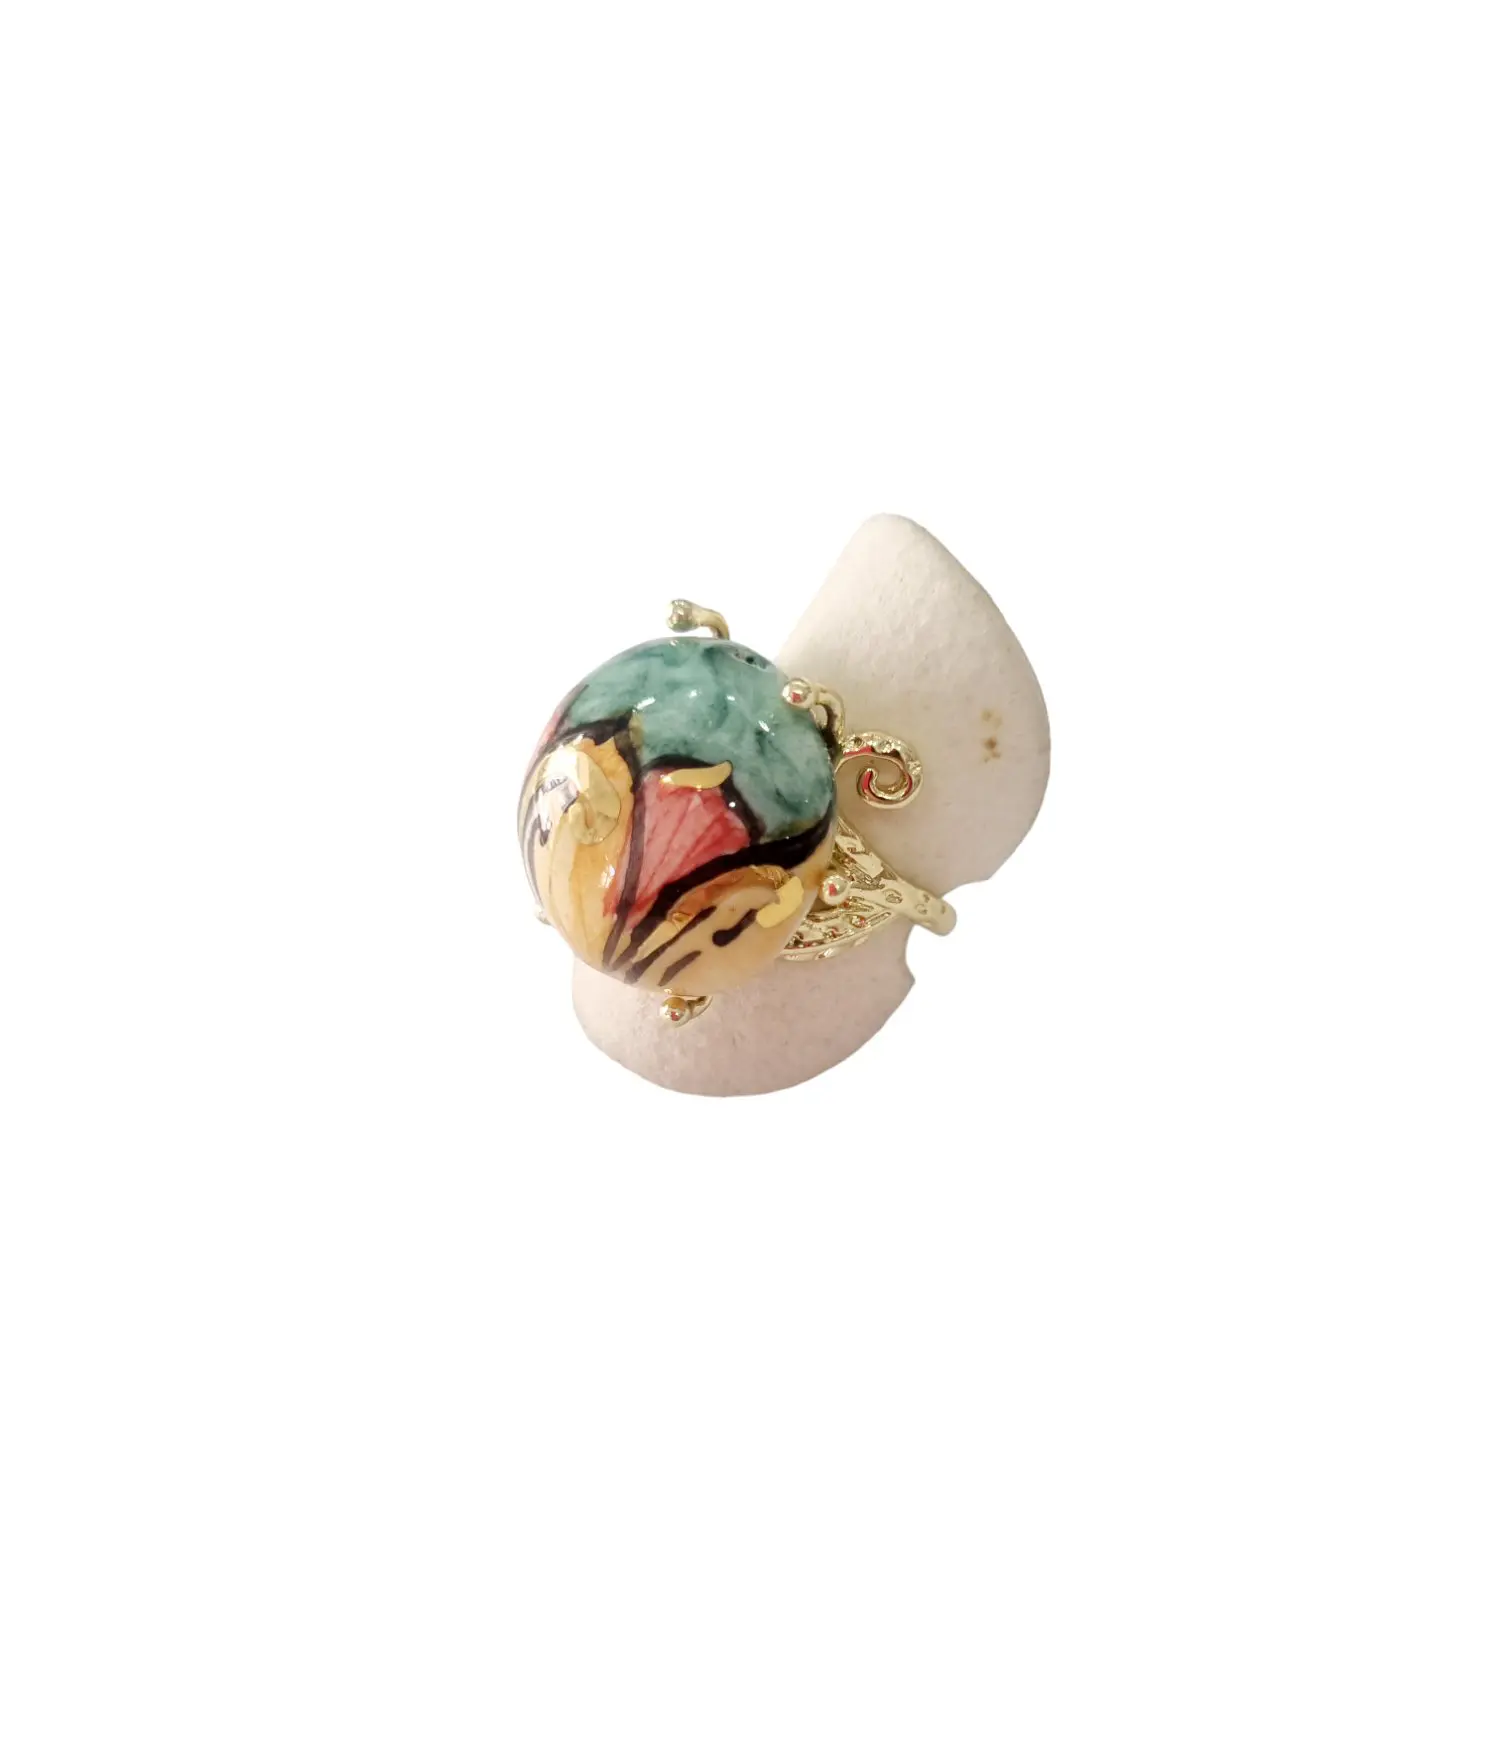 Adjustable ring on brass base with flowers painted on Caltagirone ceramic.